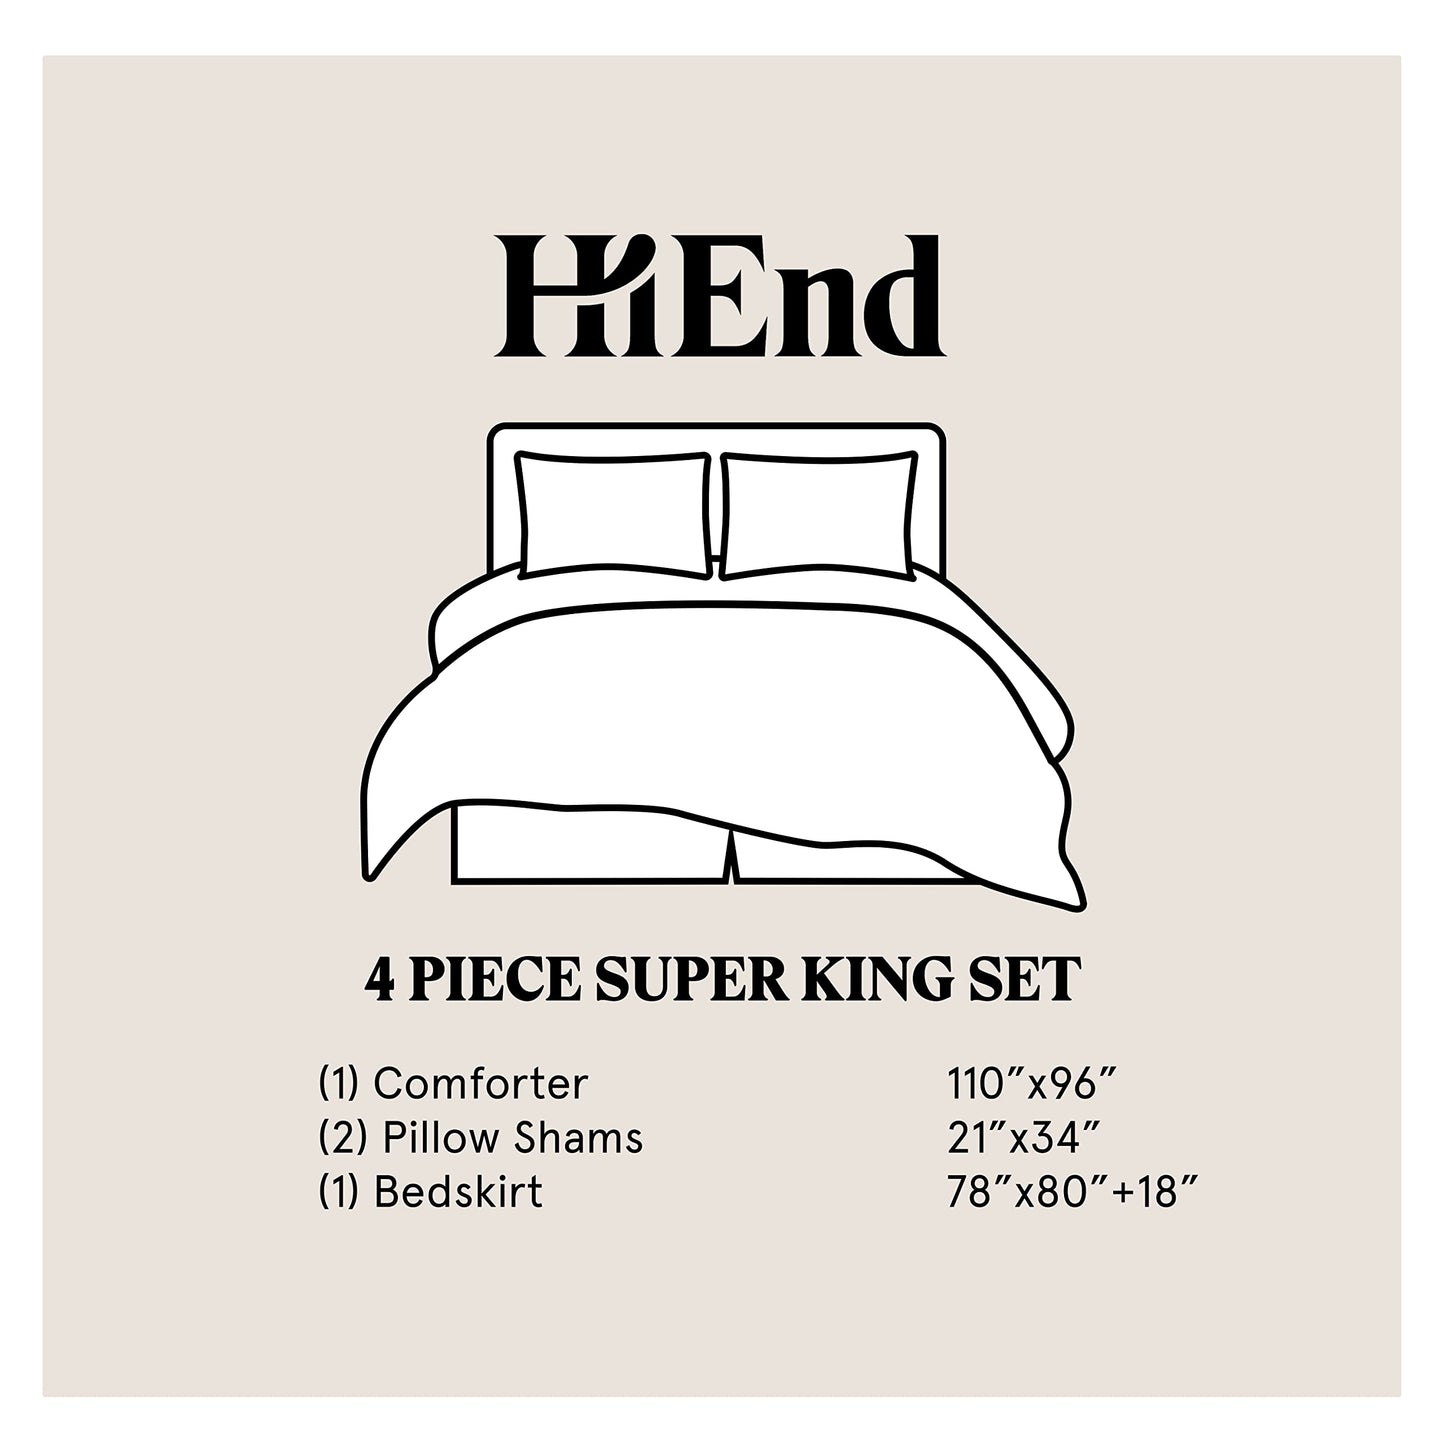 Paseo Road by HiEnd Accents San Angelo 4 Piece Comforter Set, Super King, Paisley Pattern, Teal Bed Skirt, Western Rustic Farmhouse Style Bedding Set, 1 Comforter, 1 Bedskirt, 2 Pillow Shams